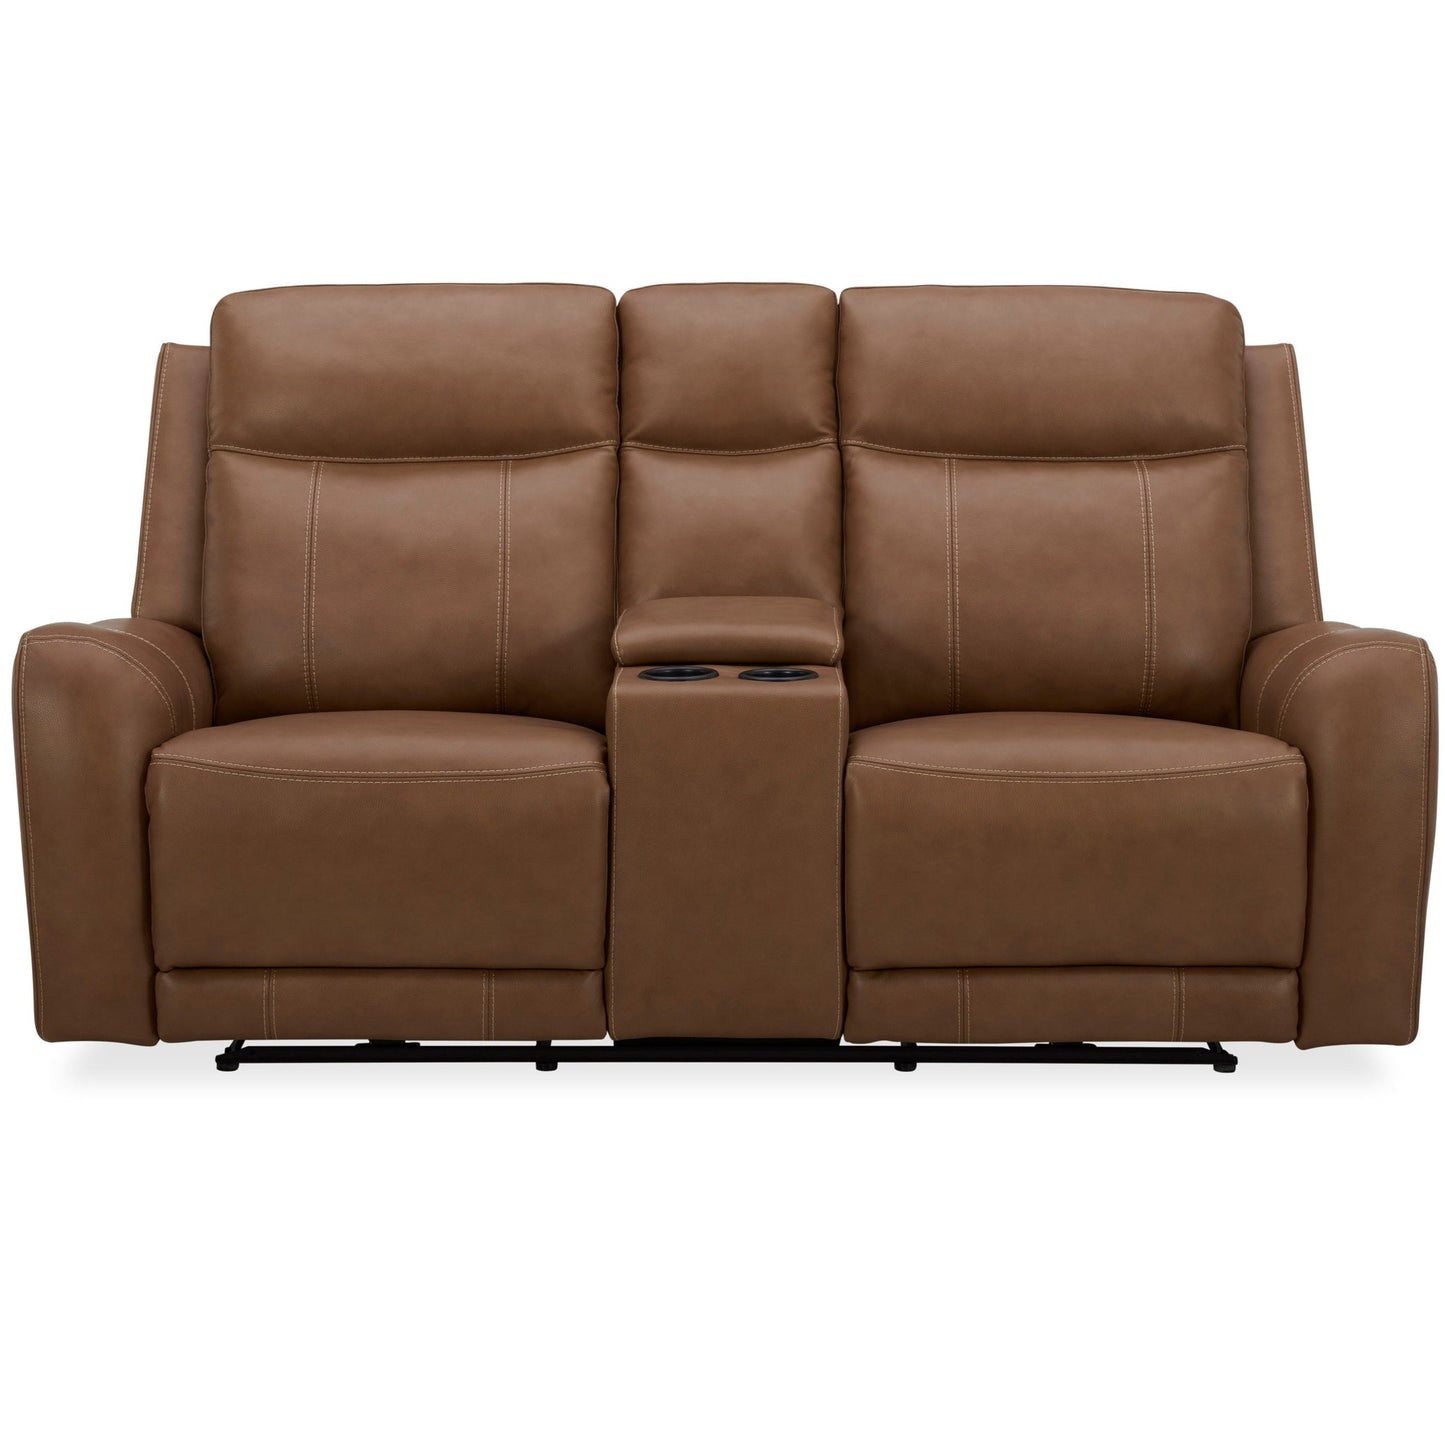 HAYWOOD - BUTTERNUT POWER CONSOLE LOVESEAT WITH POWER HEADRESTS